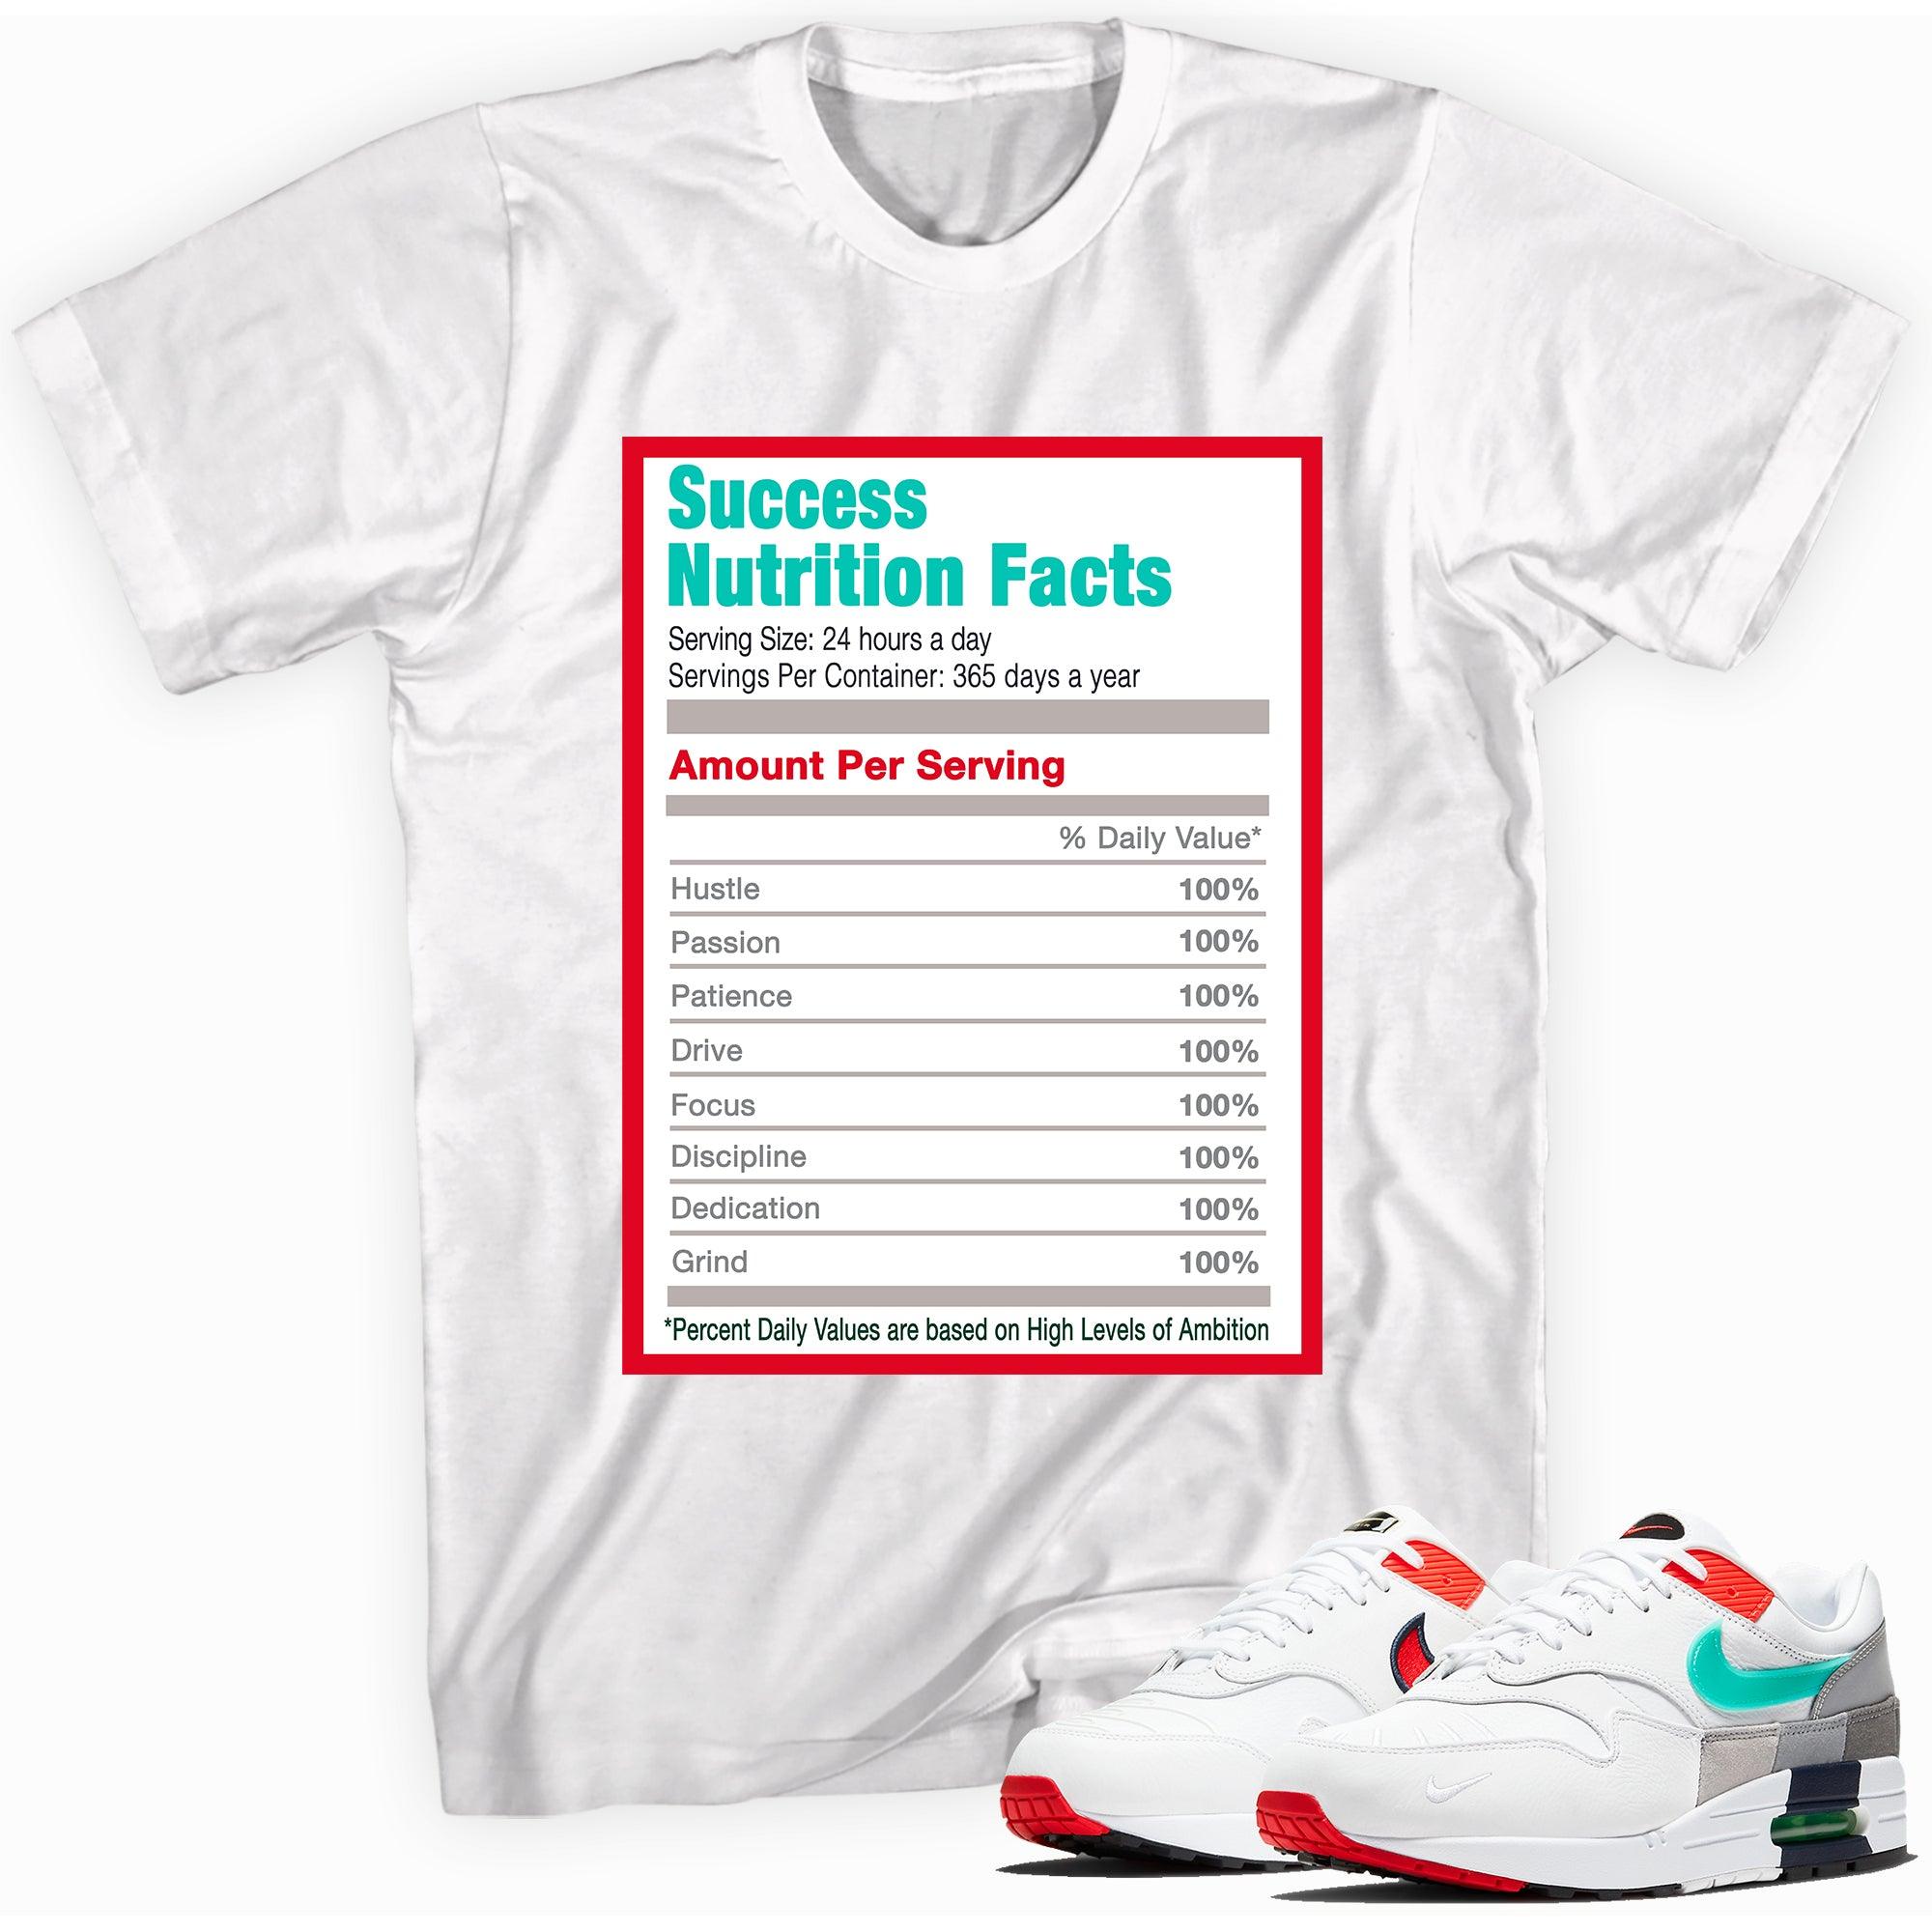 Success Nutrition Facts Shirt Nike Air Max 1 Evolution Of Icons photo